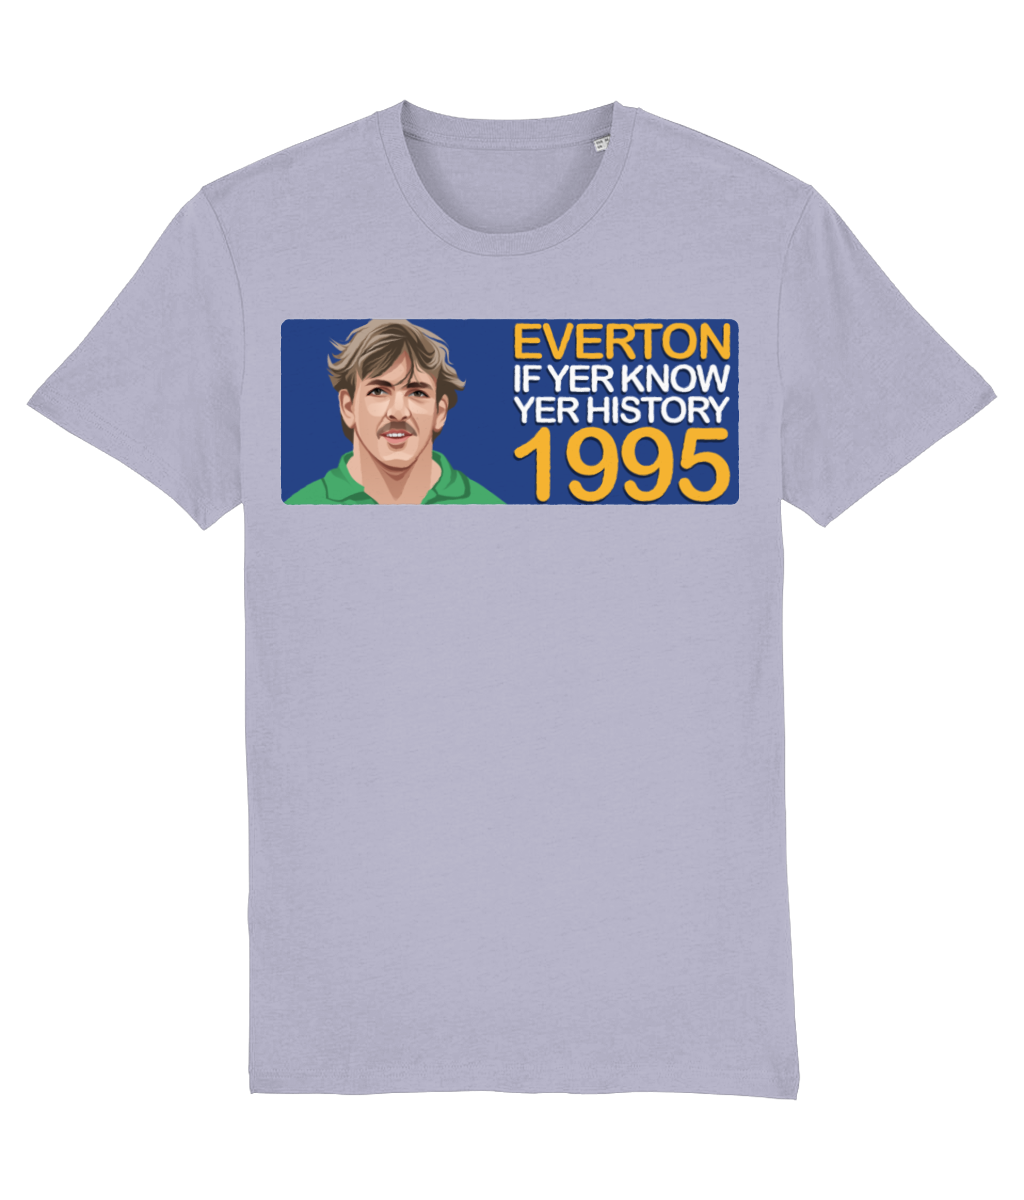 Everton 1995 Neville Southall If Yer Know Yer History Unisex T-Shirt Stanley/Stella Retrotext Lavender XX-Small 